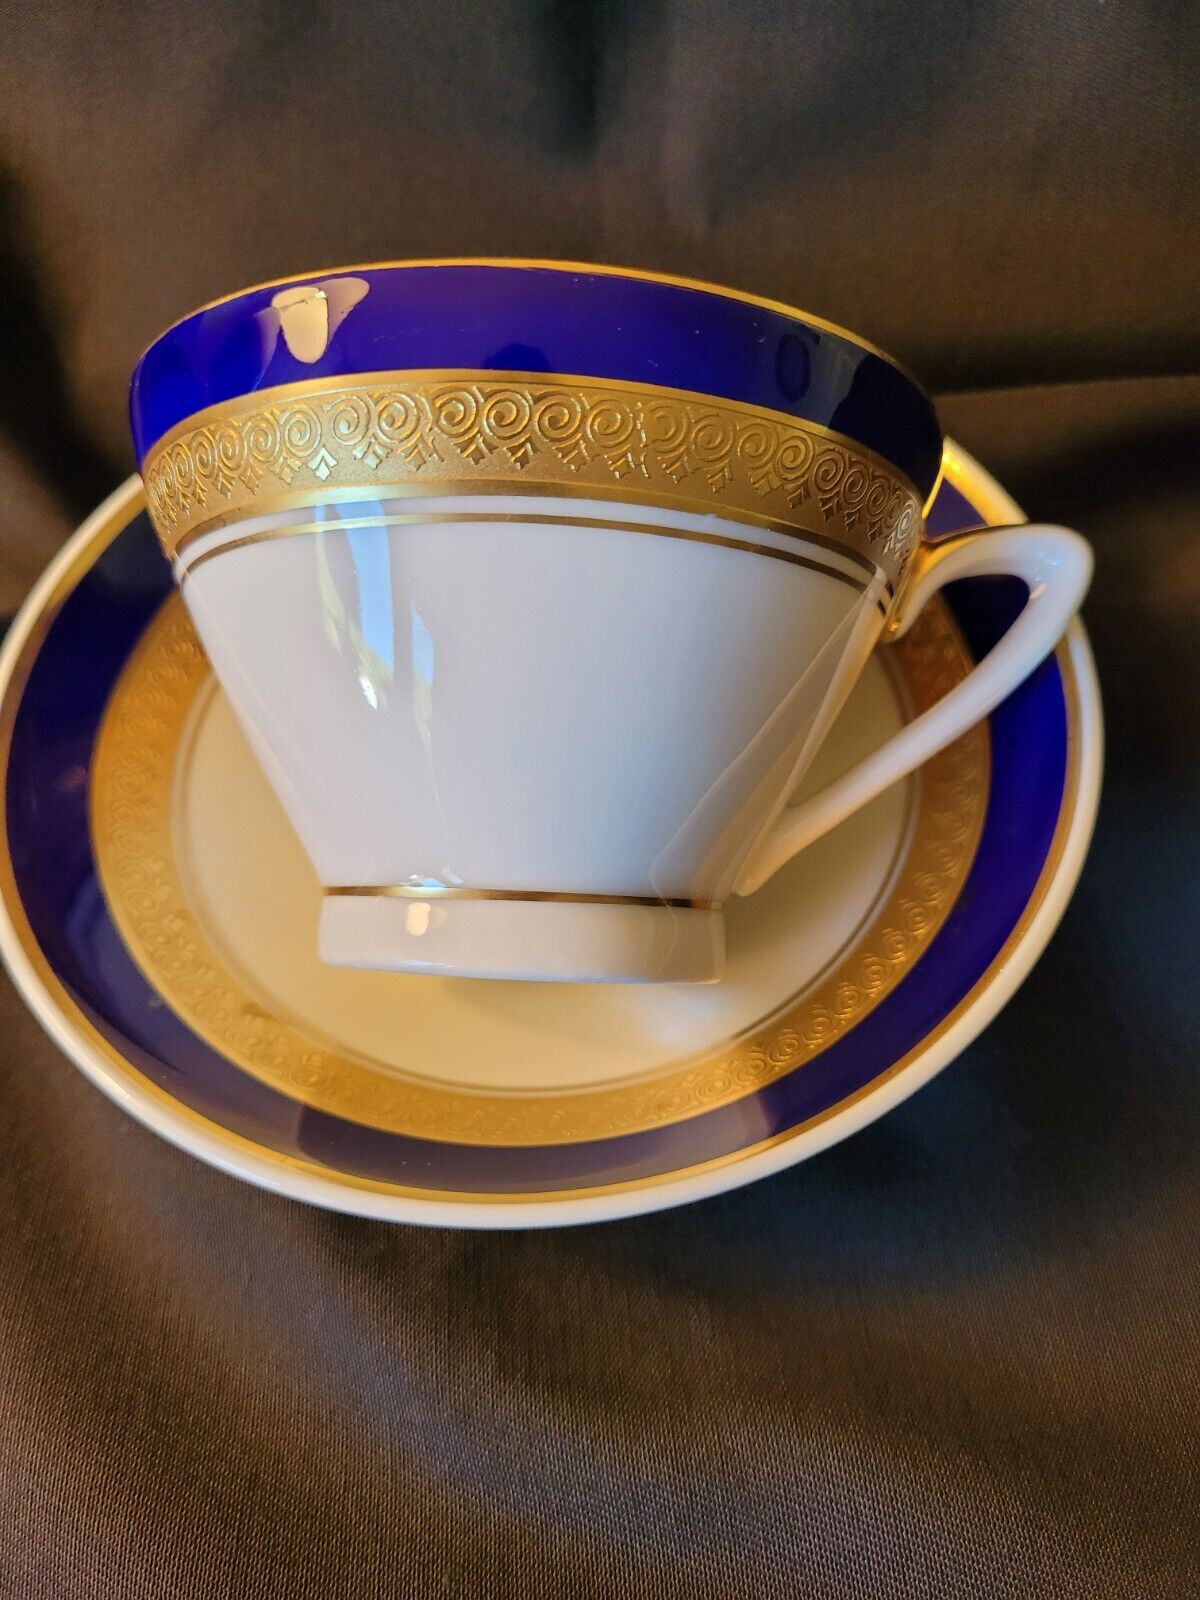 Schmidt & Catarina Porcelane Cup and Saucer Made in Brazil